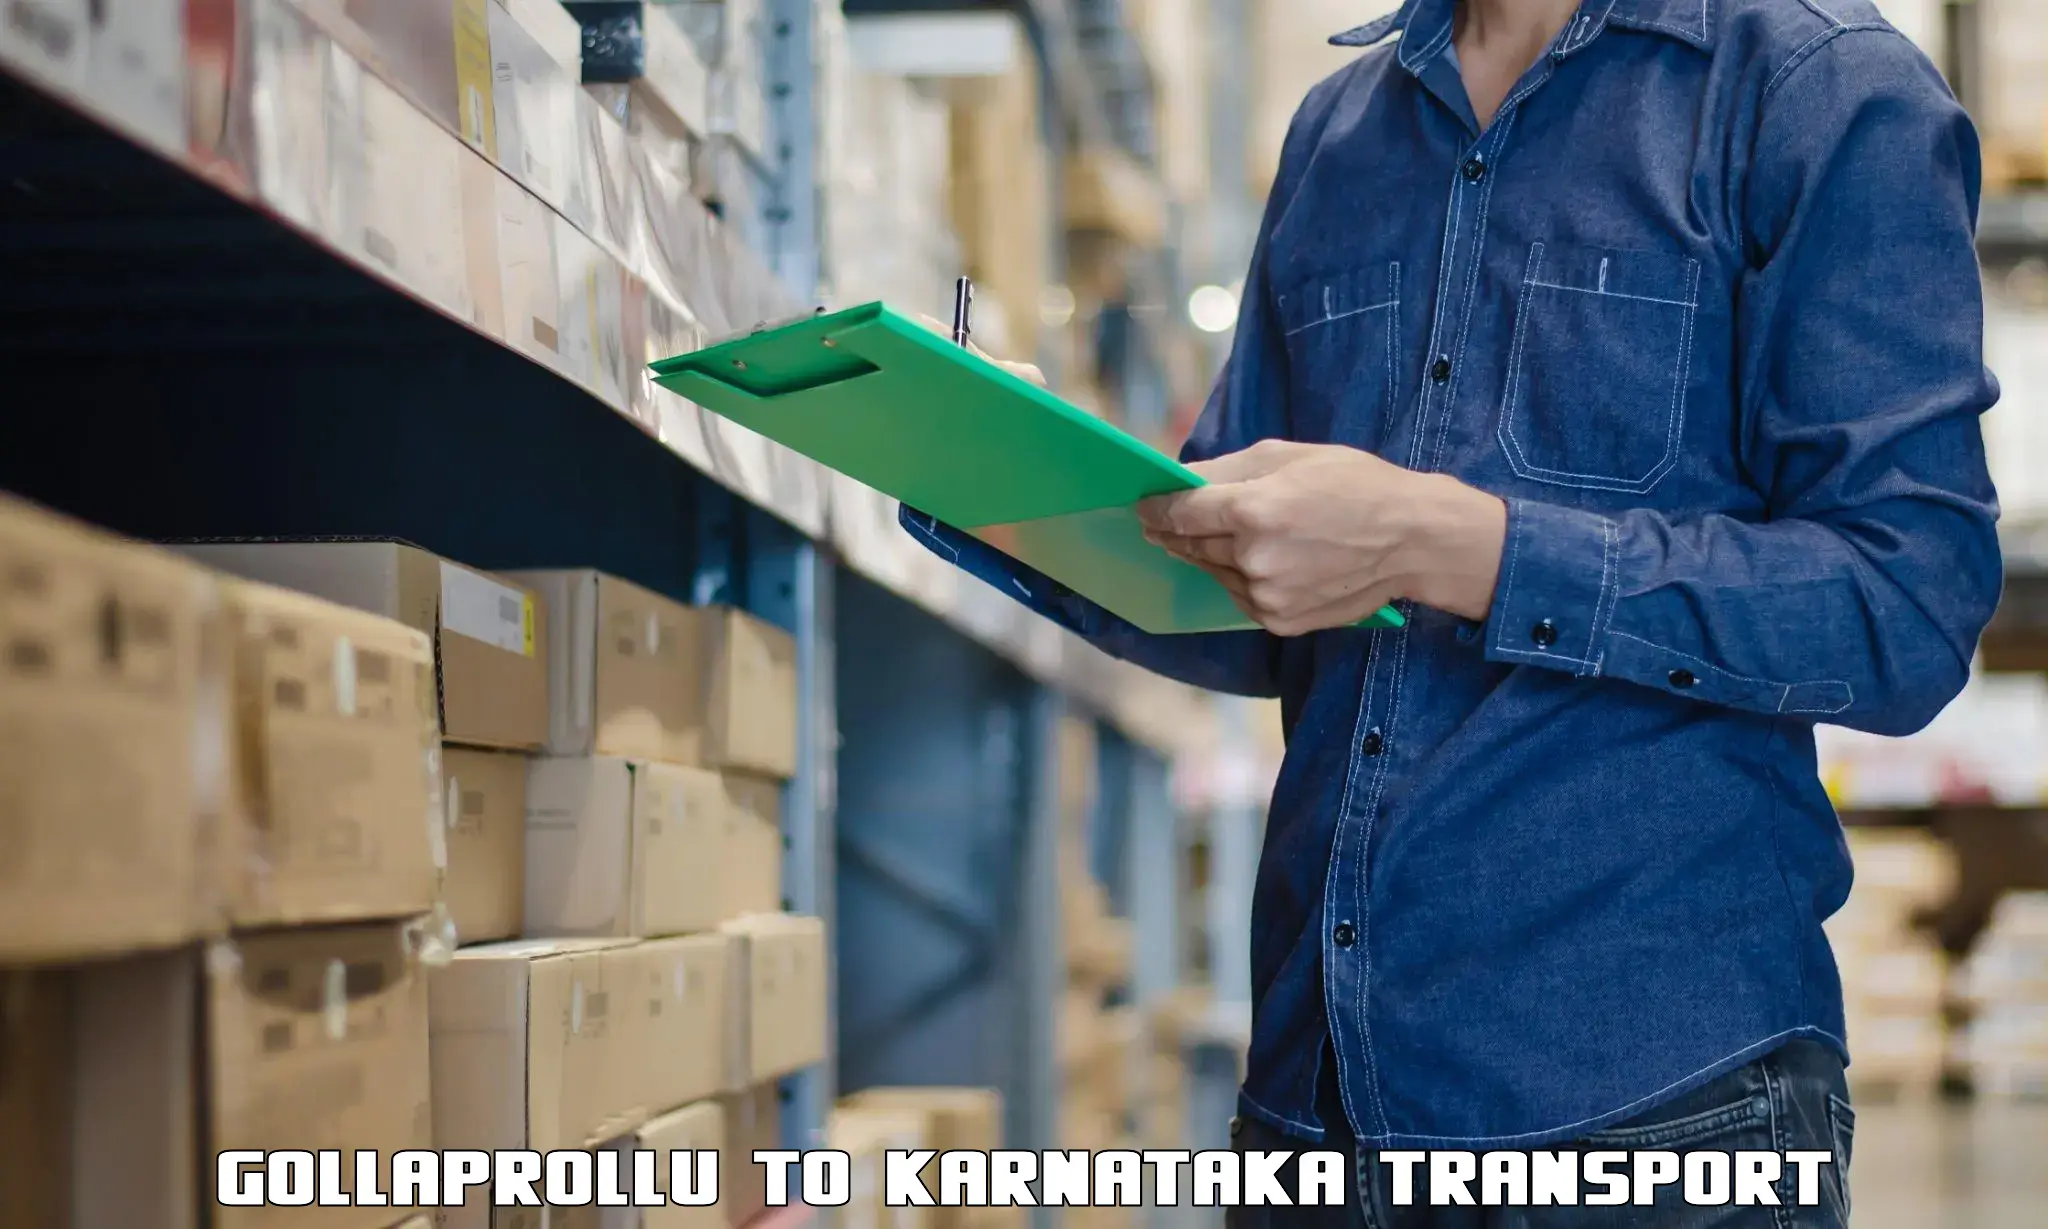 Interstate transport services Gollaprollu to Dharmasthala